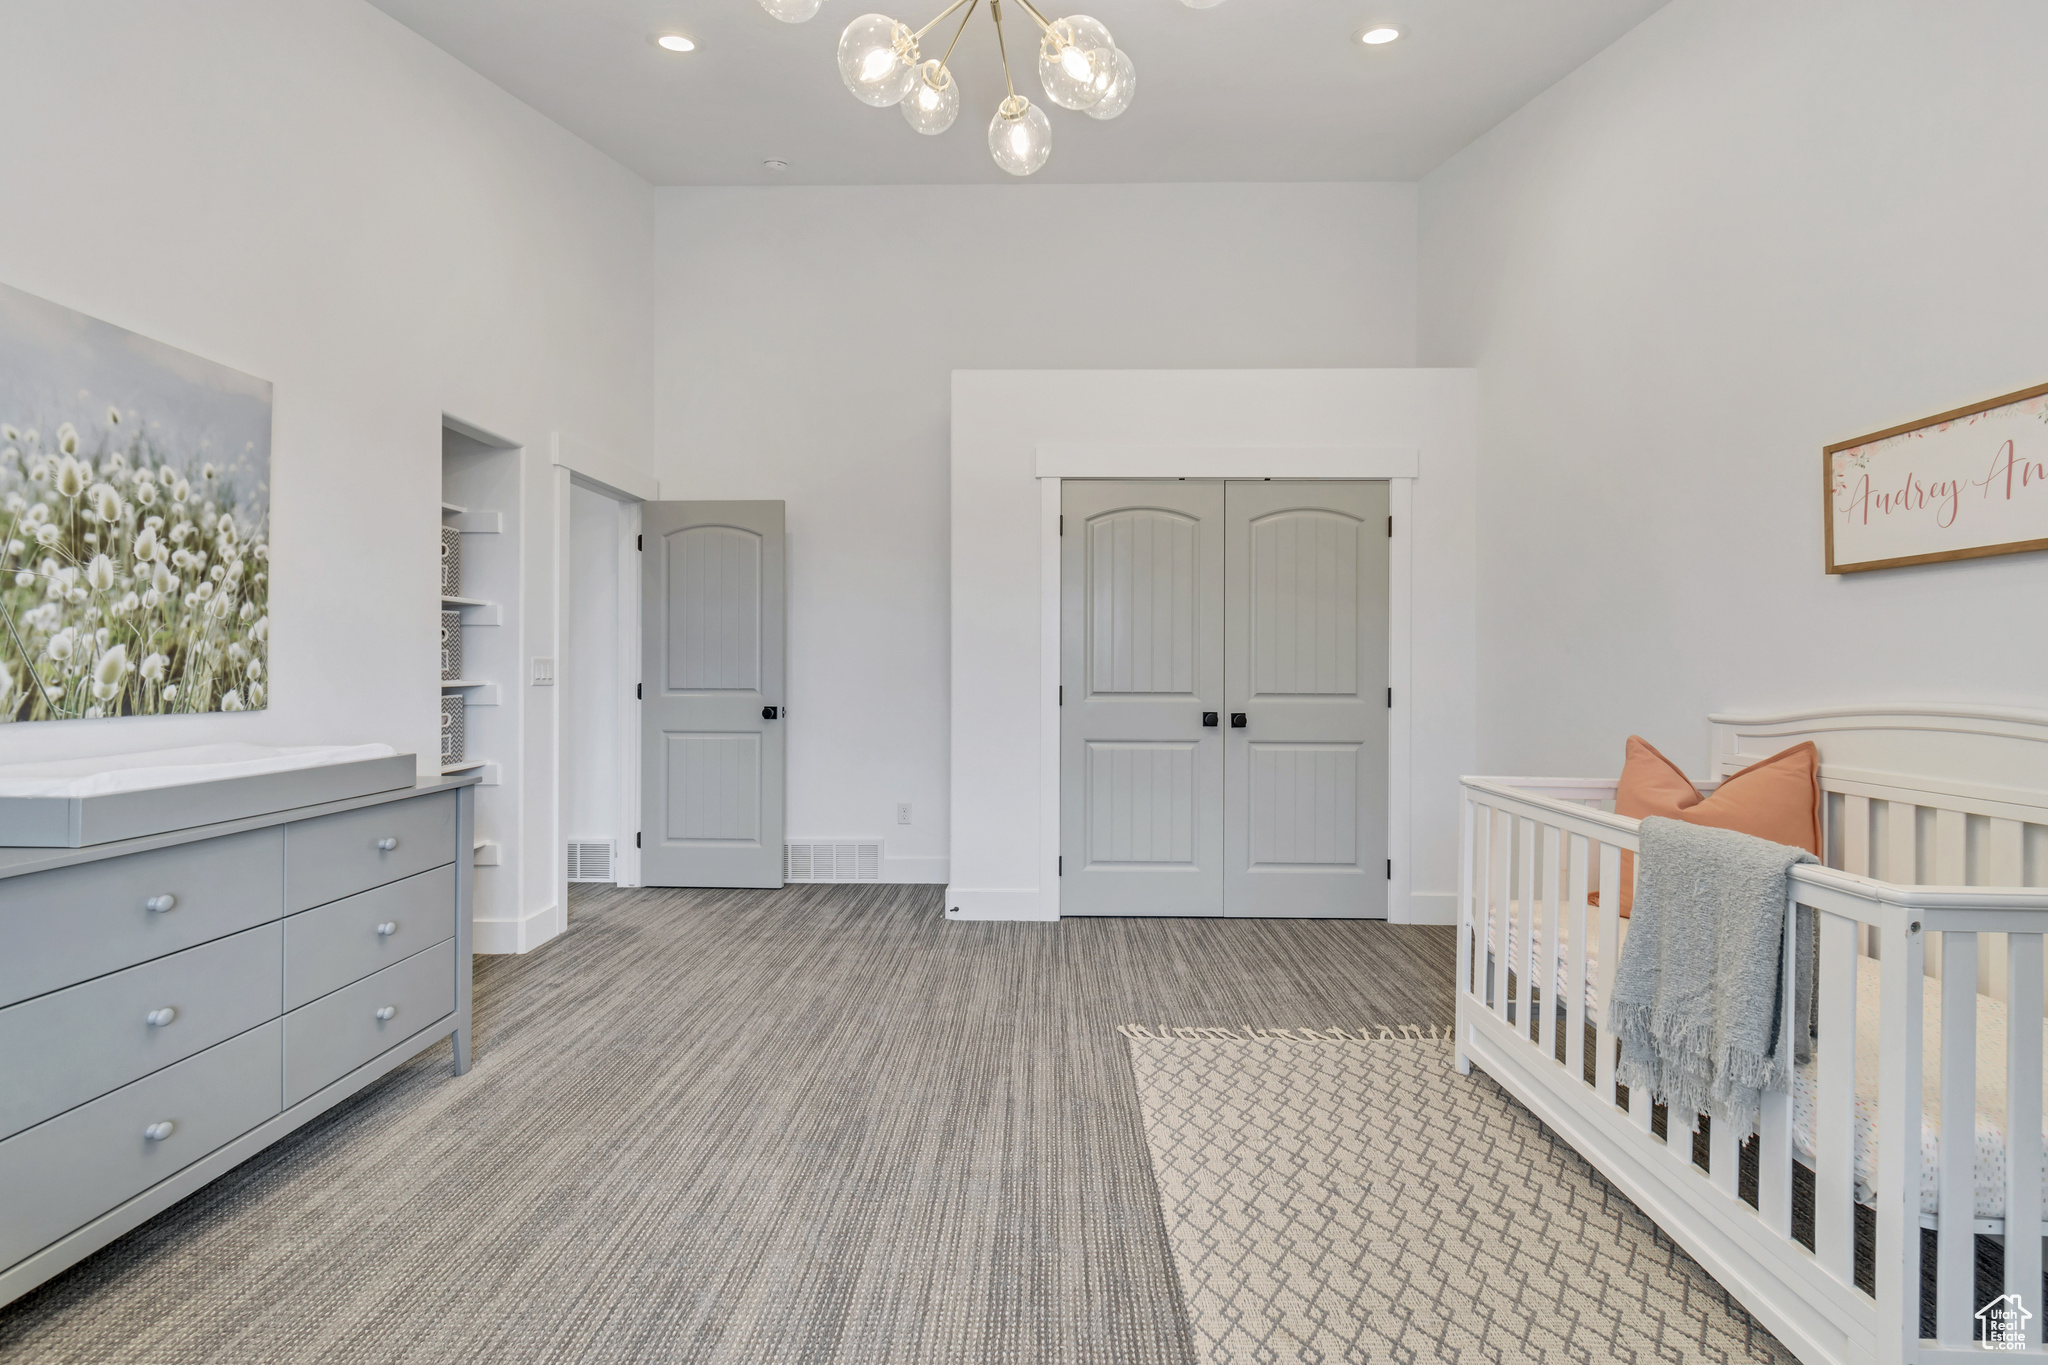 Bedroom featuring light carpet, a closet, an inviting chandelier, a nursery area, and a towering ceiling